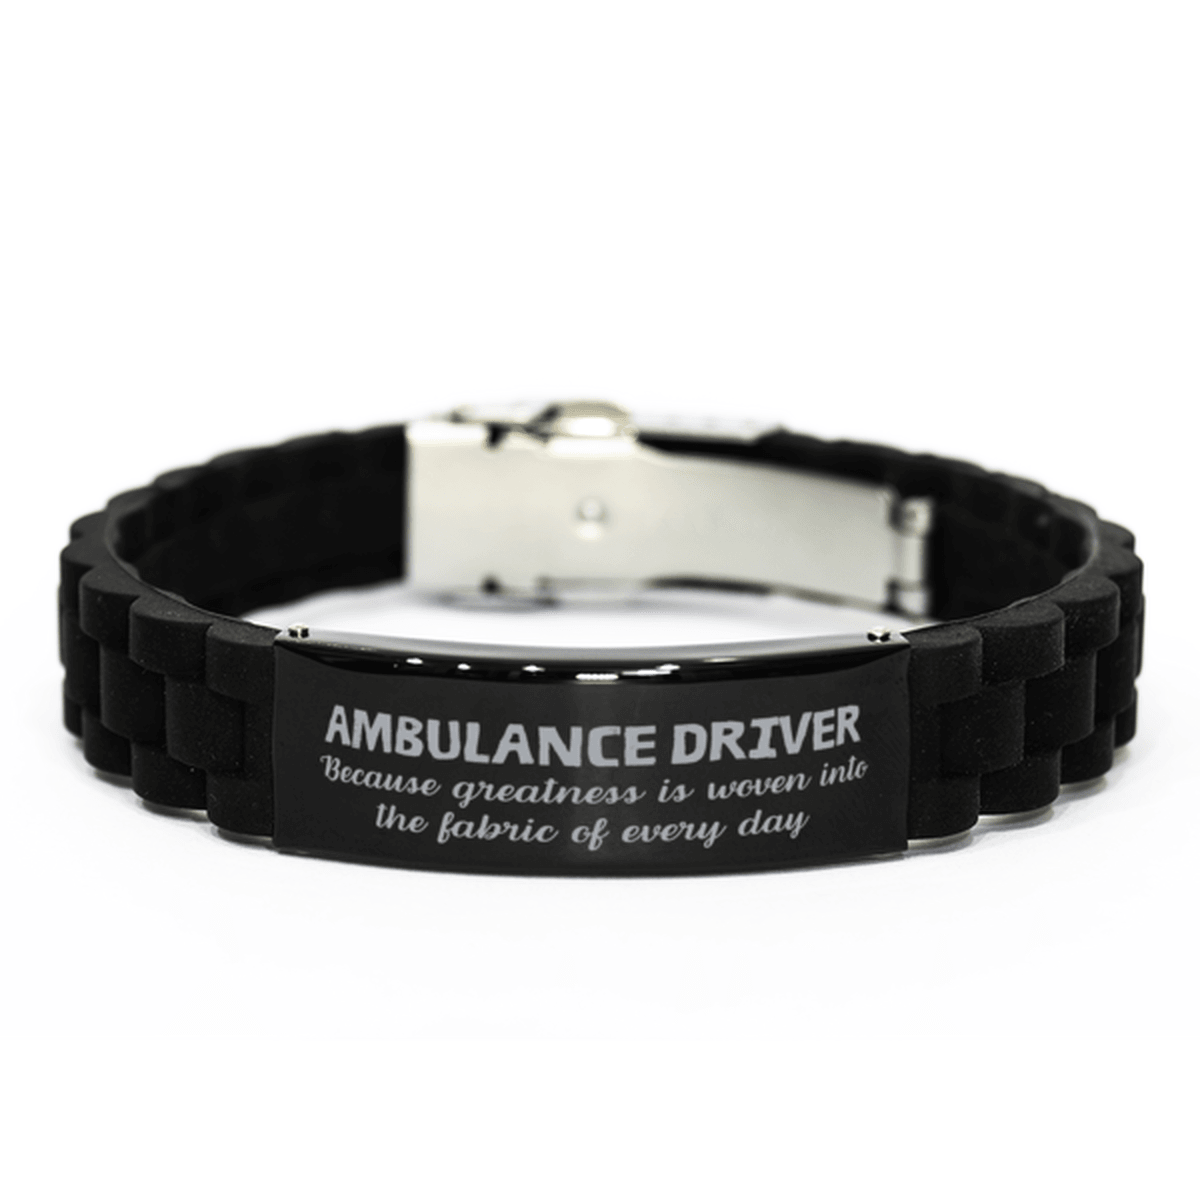 Sarcastic Ambulance Driver Black Glidelock Clasp Bracelet Gifts, Christmas Holiday Gifts for Ambulance Driver Birthday, Ambulance Driver: Because greatness is woven into the fabric of every day, Coworkers, Friends - Mallard Moon Gift Shop